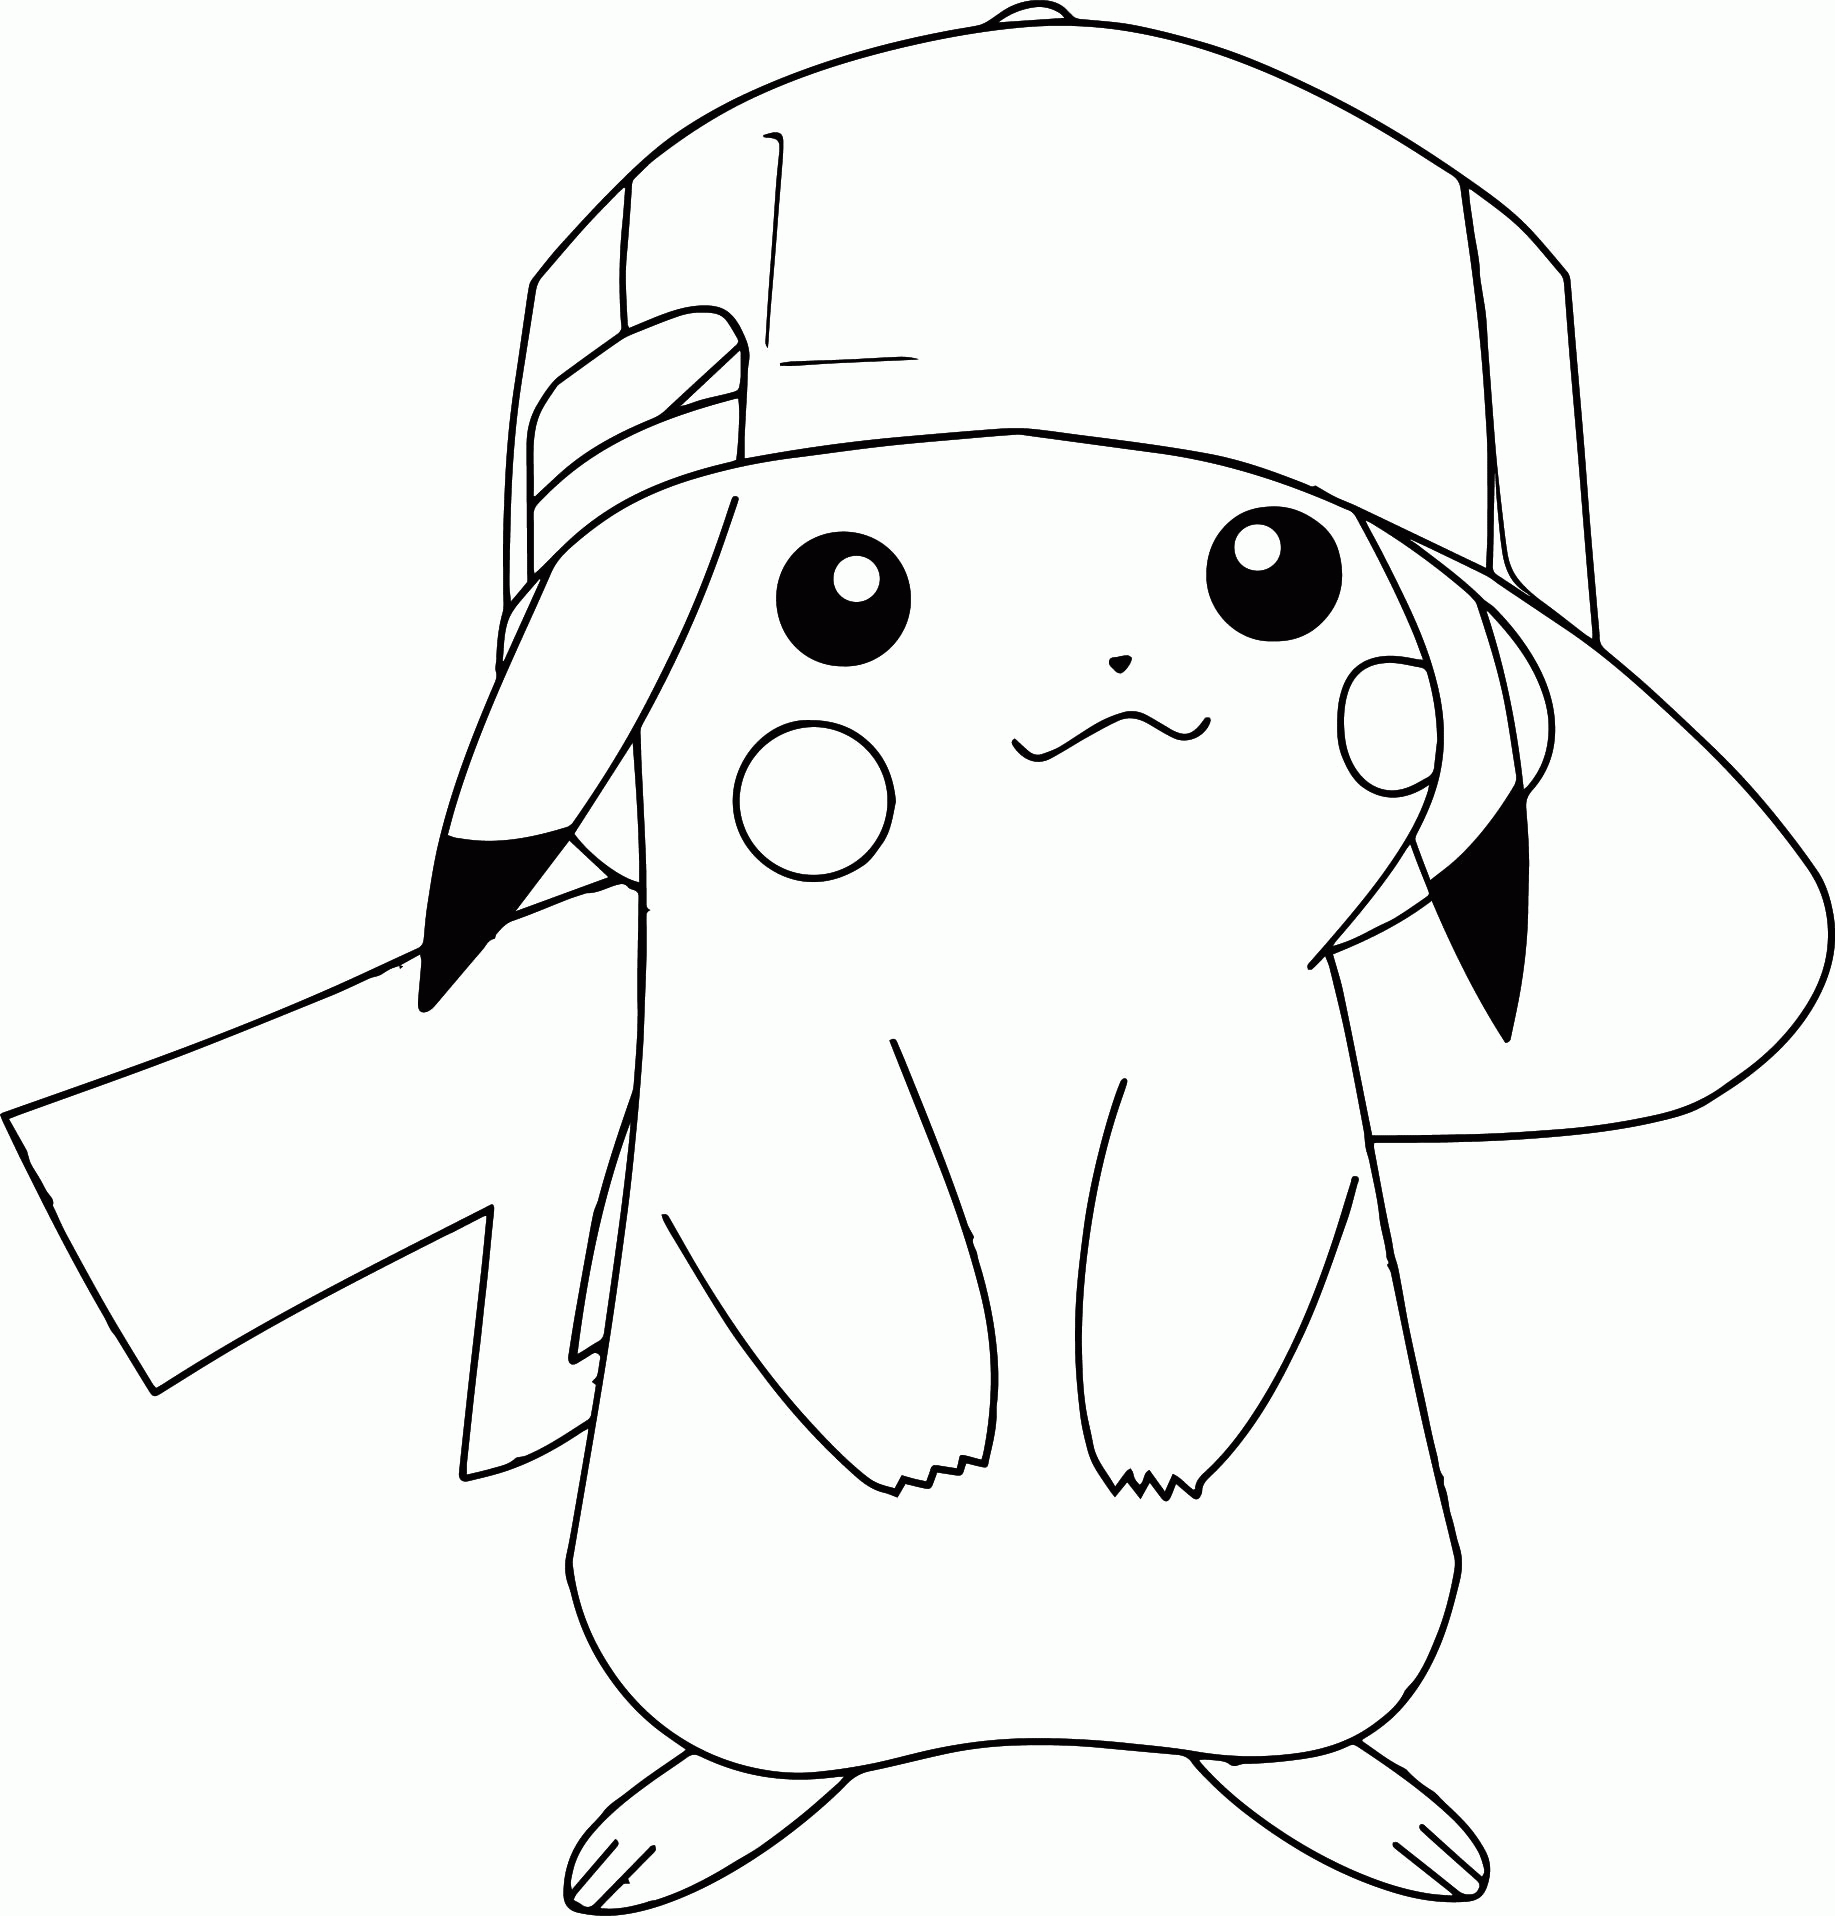 Pokemon Pikachu Coloring Sheets - High Quality Coloring Pages